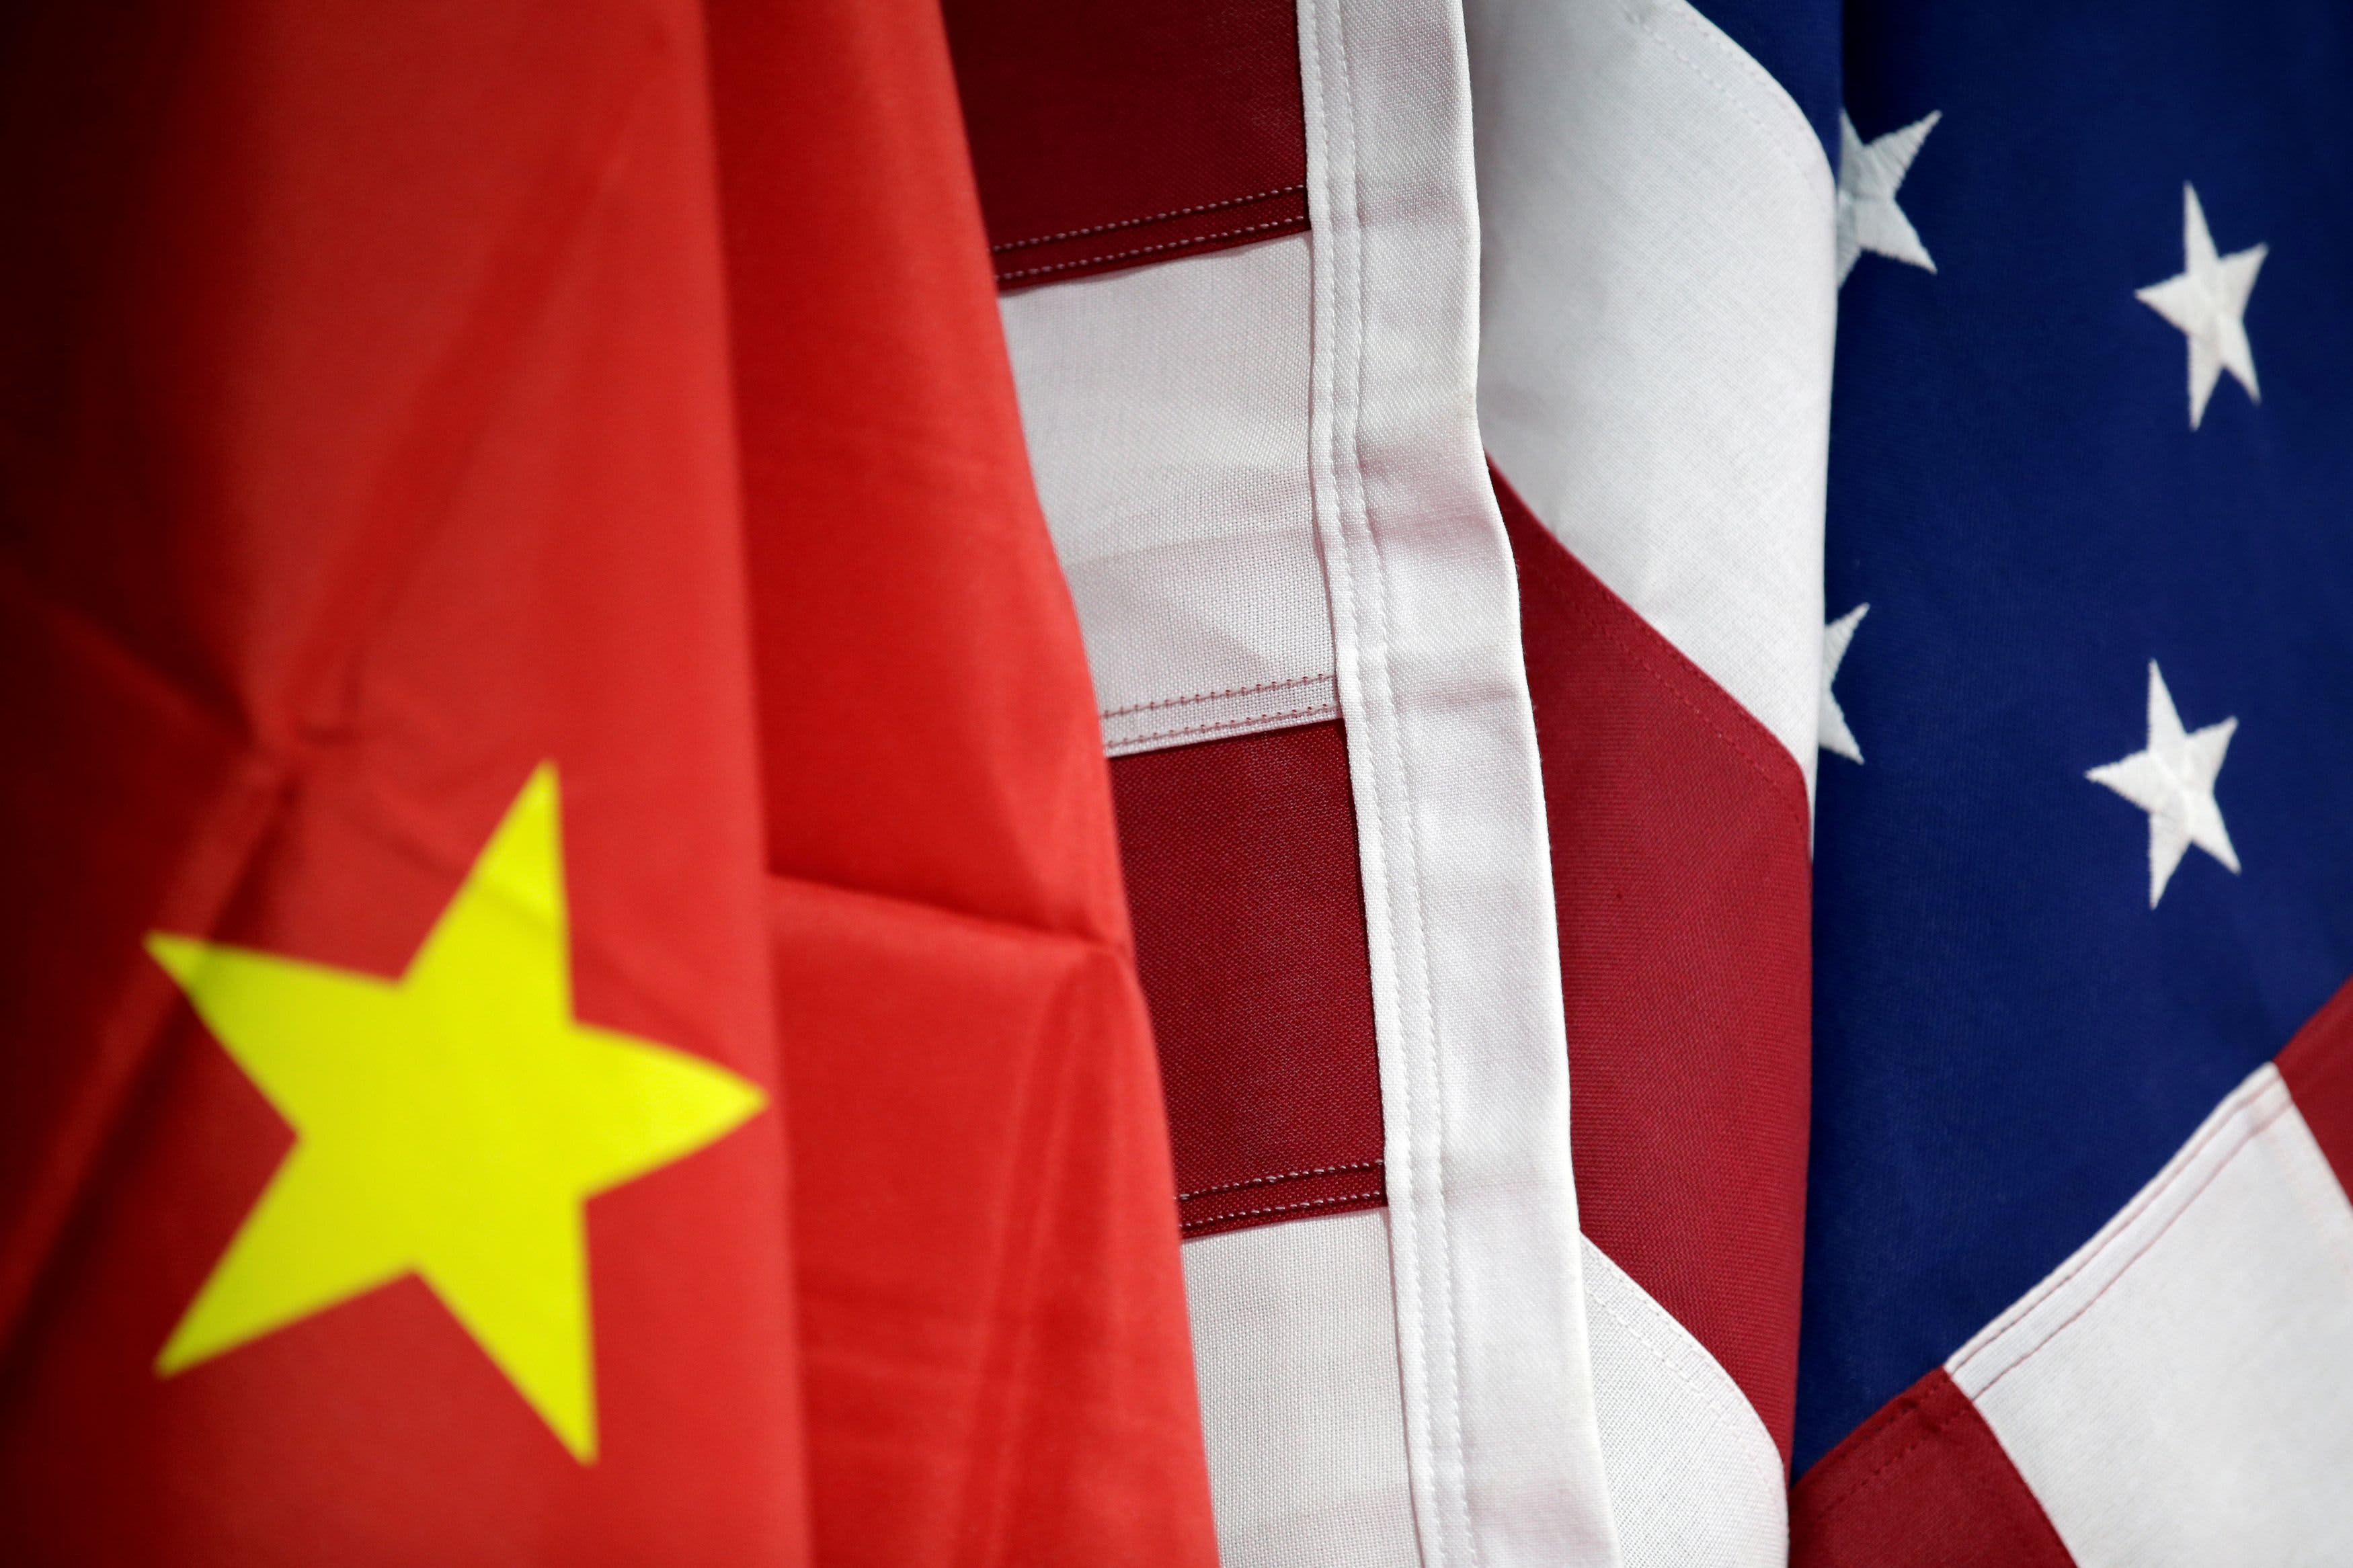 US-China decoupling would cost America hundreds of billions of dollars